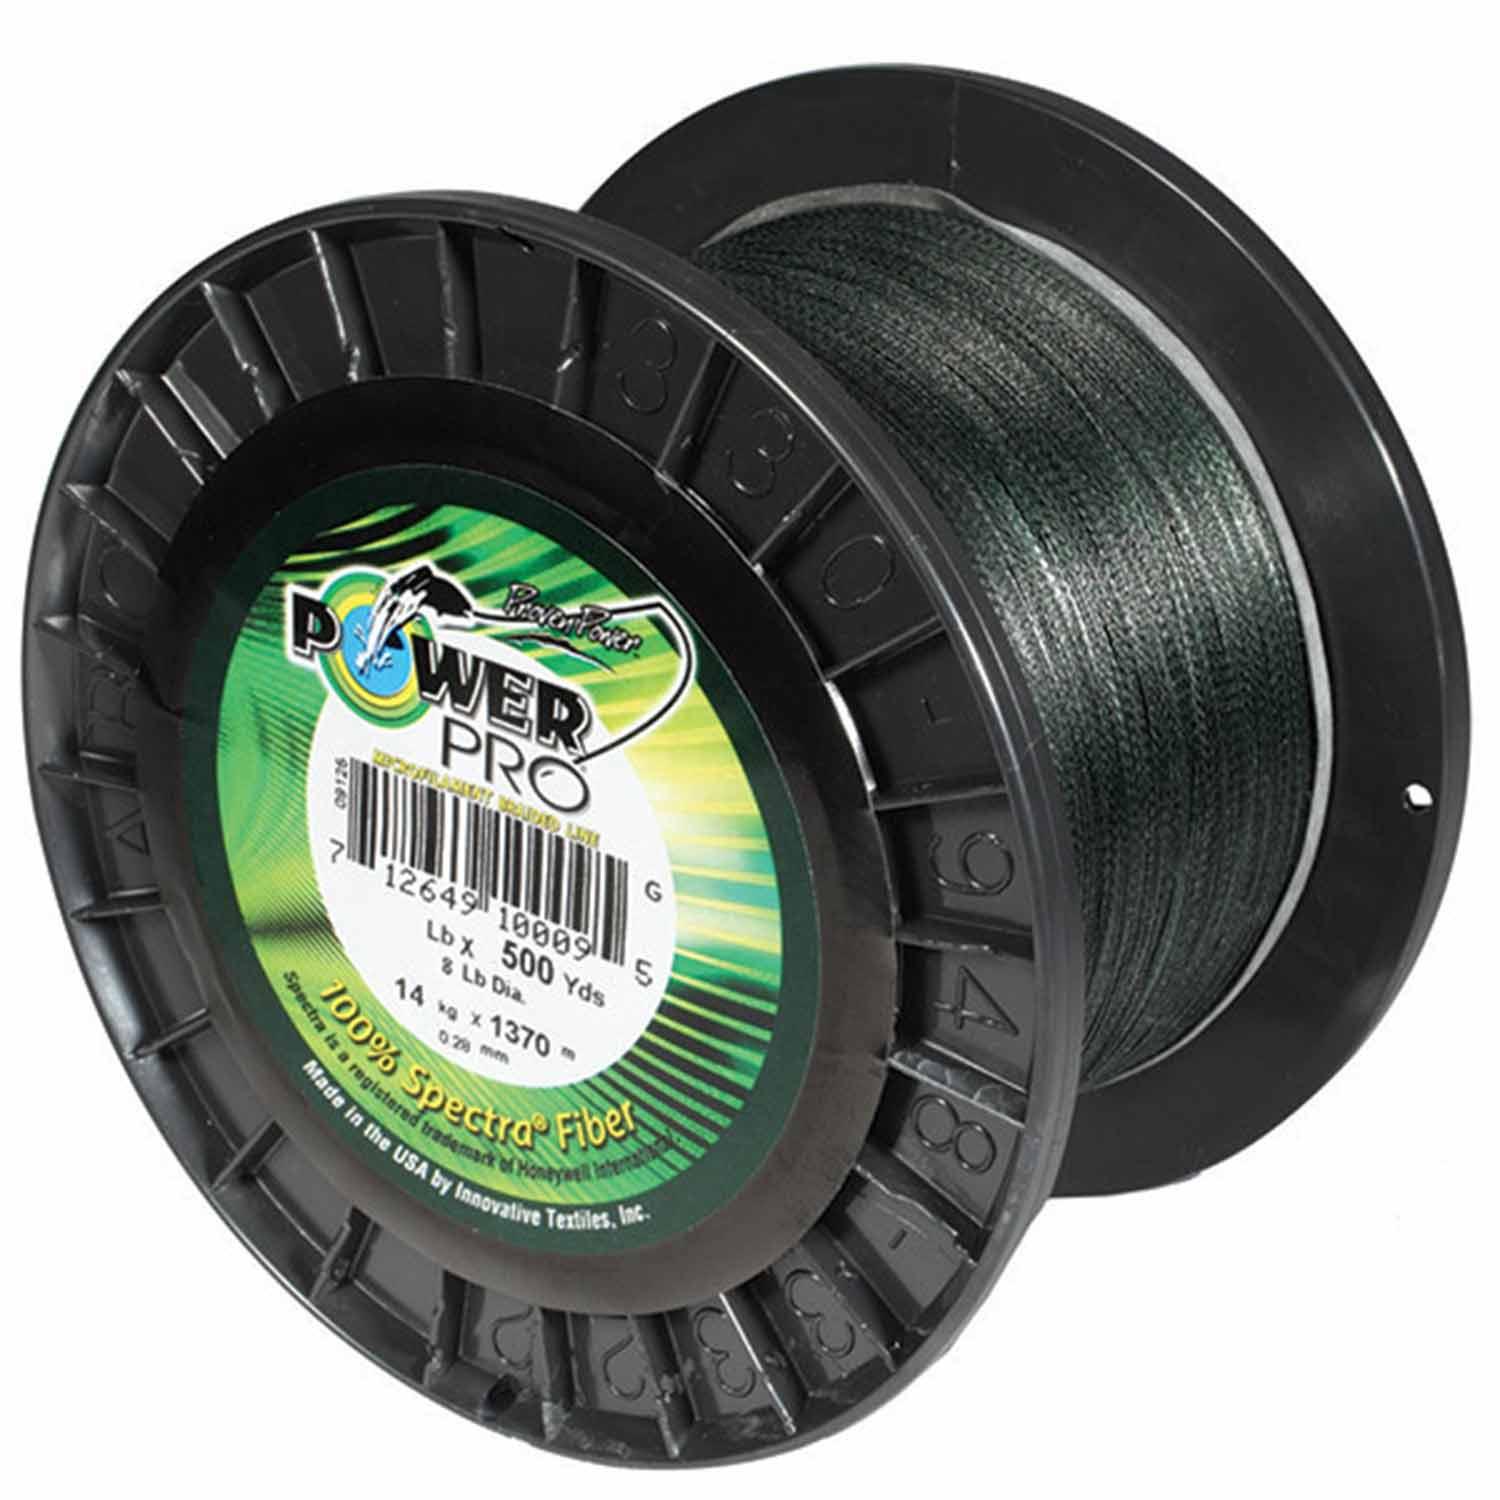  Fins Spectra 600-Yards Hollow Core Metered Fishing Line, 130- Pound : Superbraid And Braided Fishing Line : Sports & Outdoors